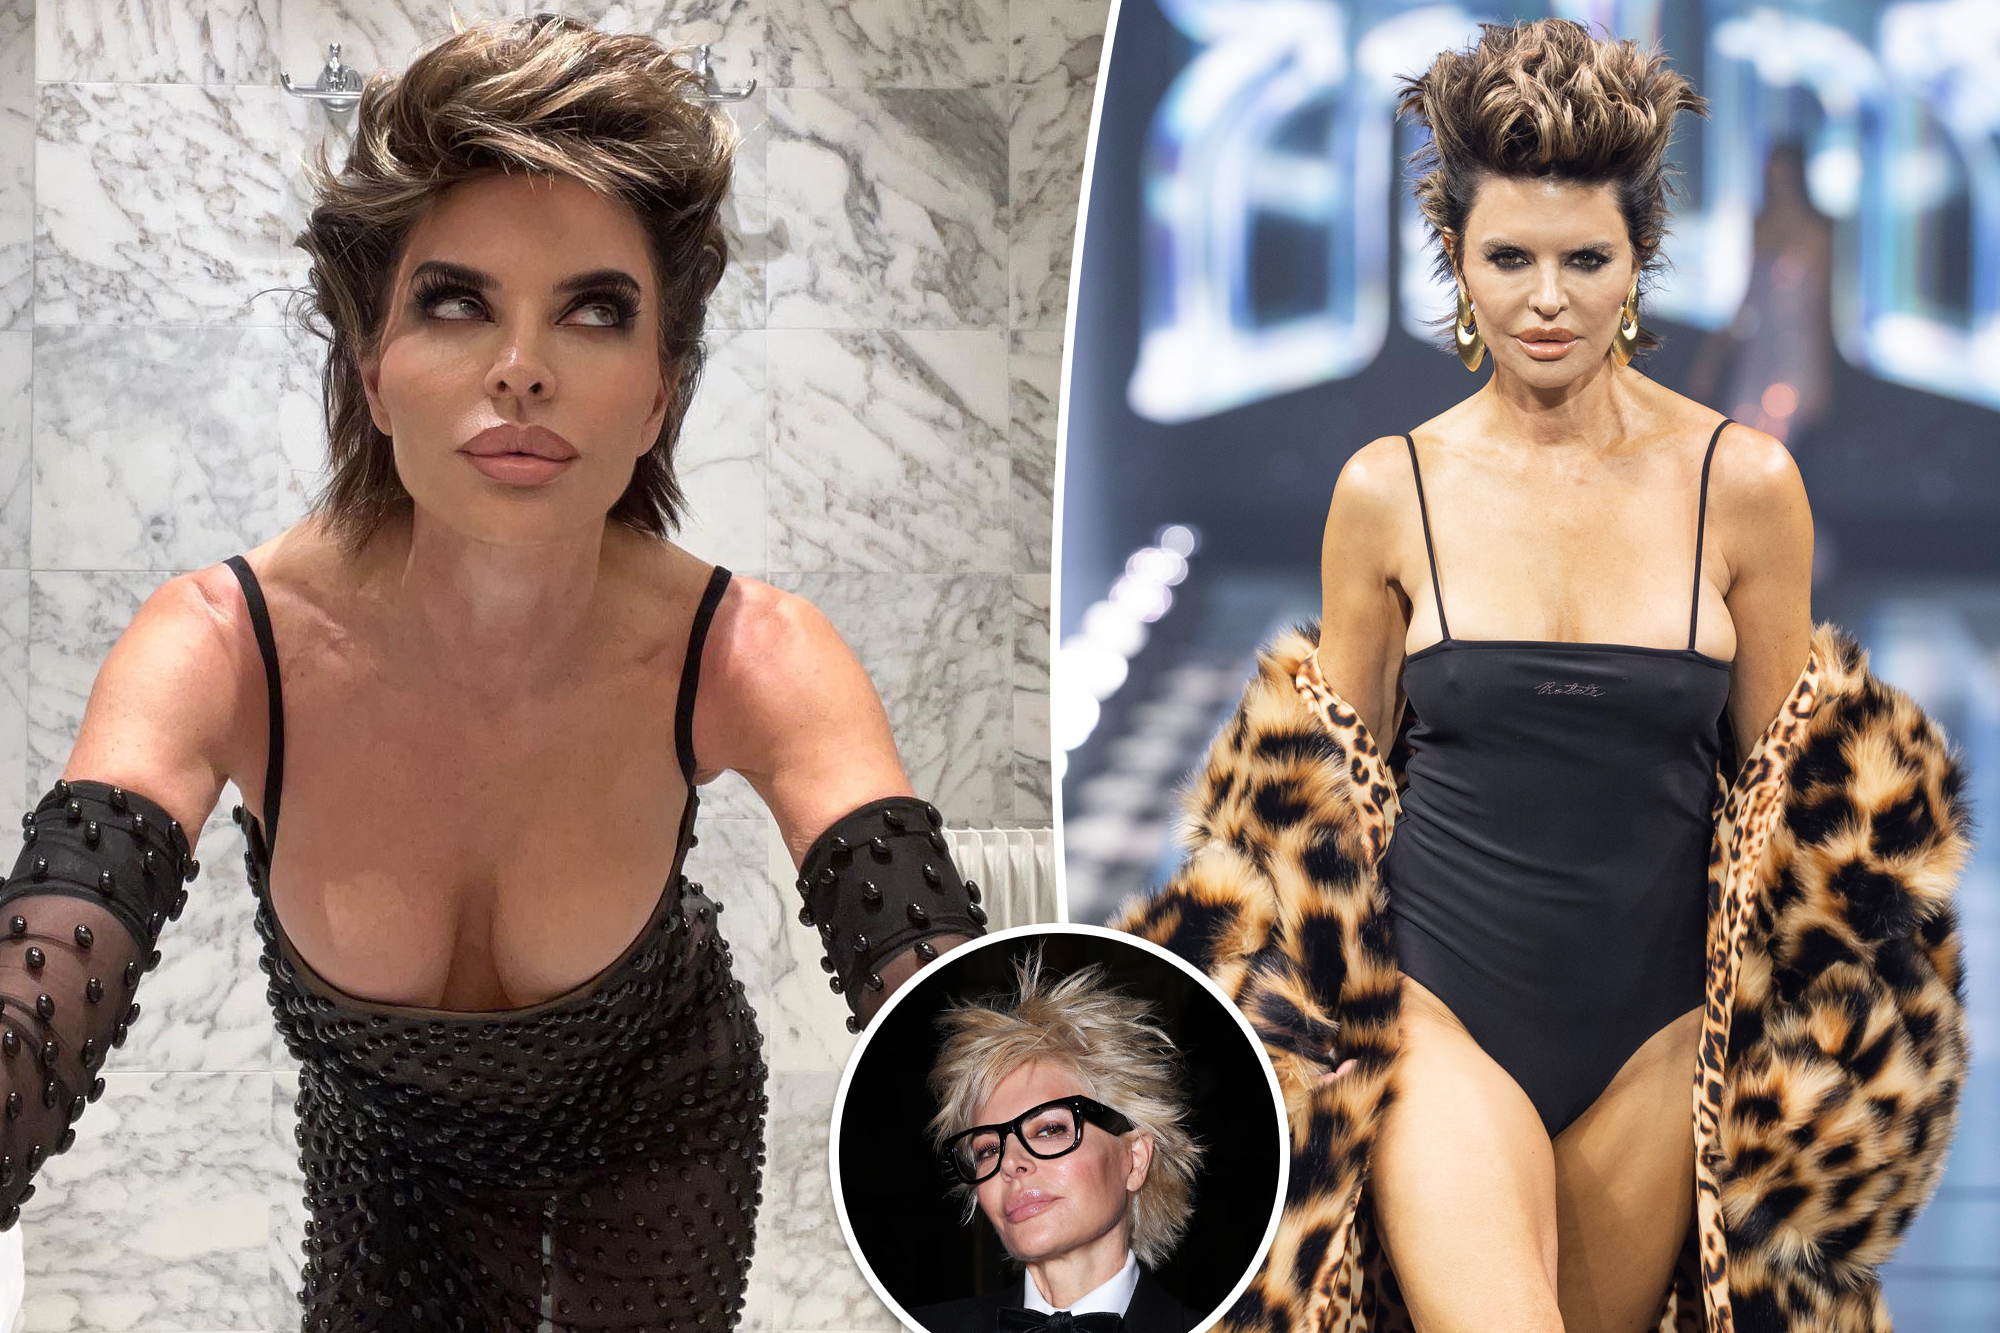 Lisa Rinna's Bold Blond Transformation: From Real Housewife to Fashion Icon